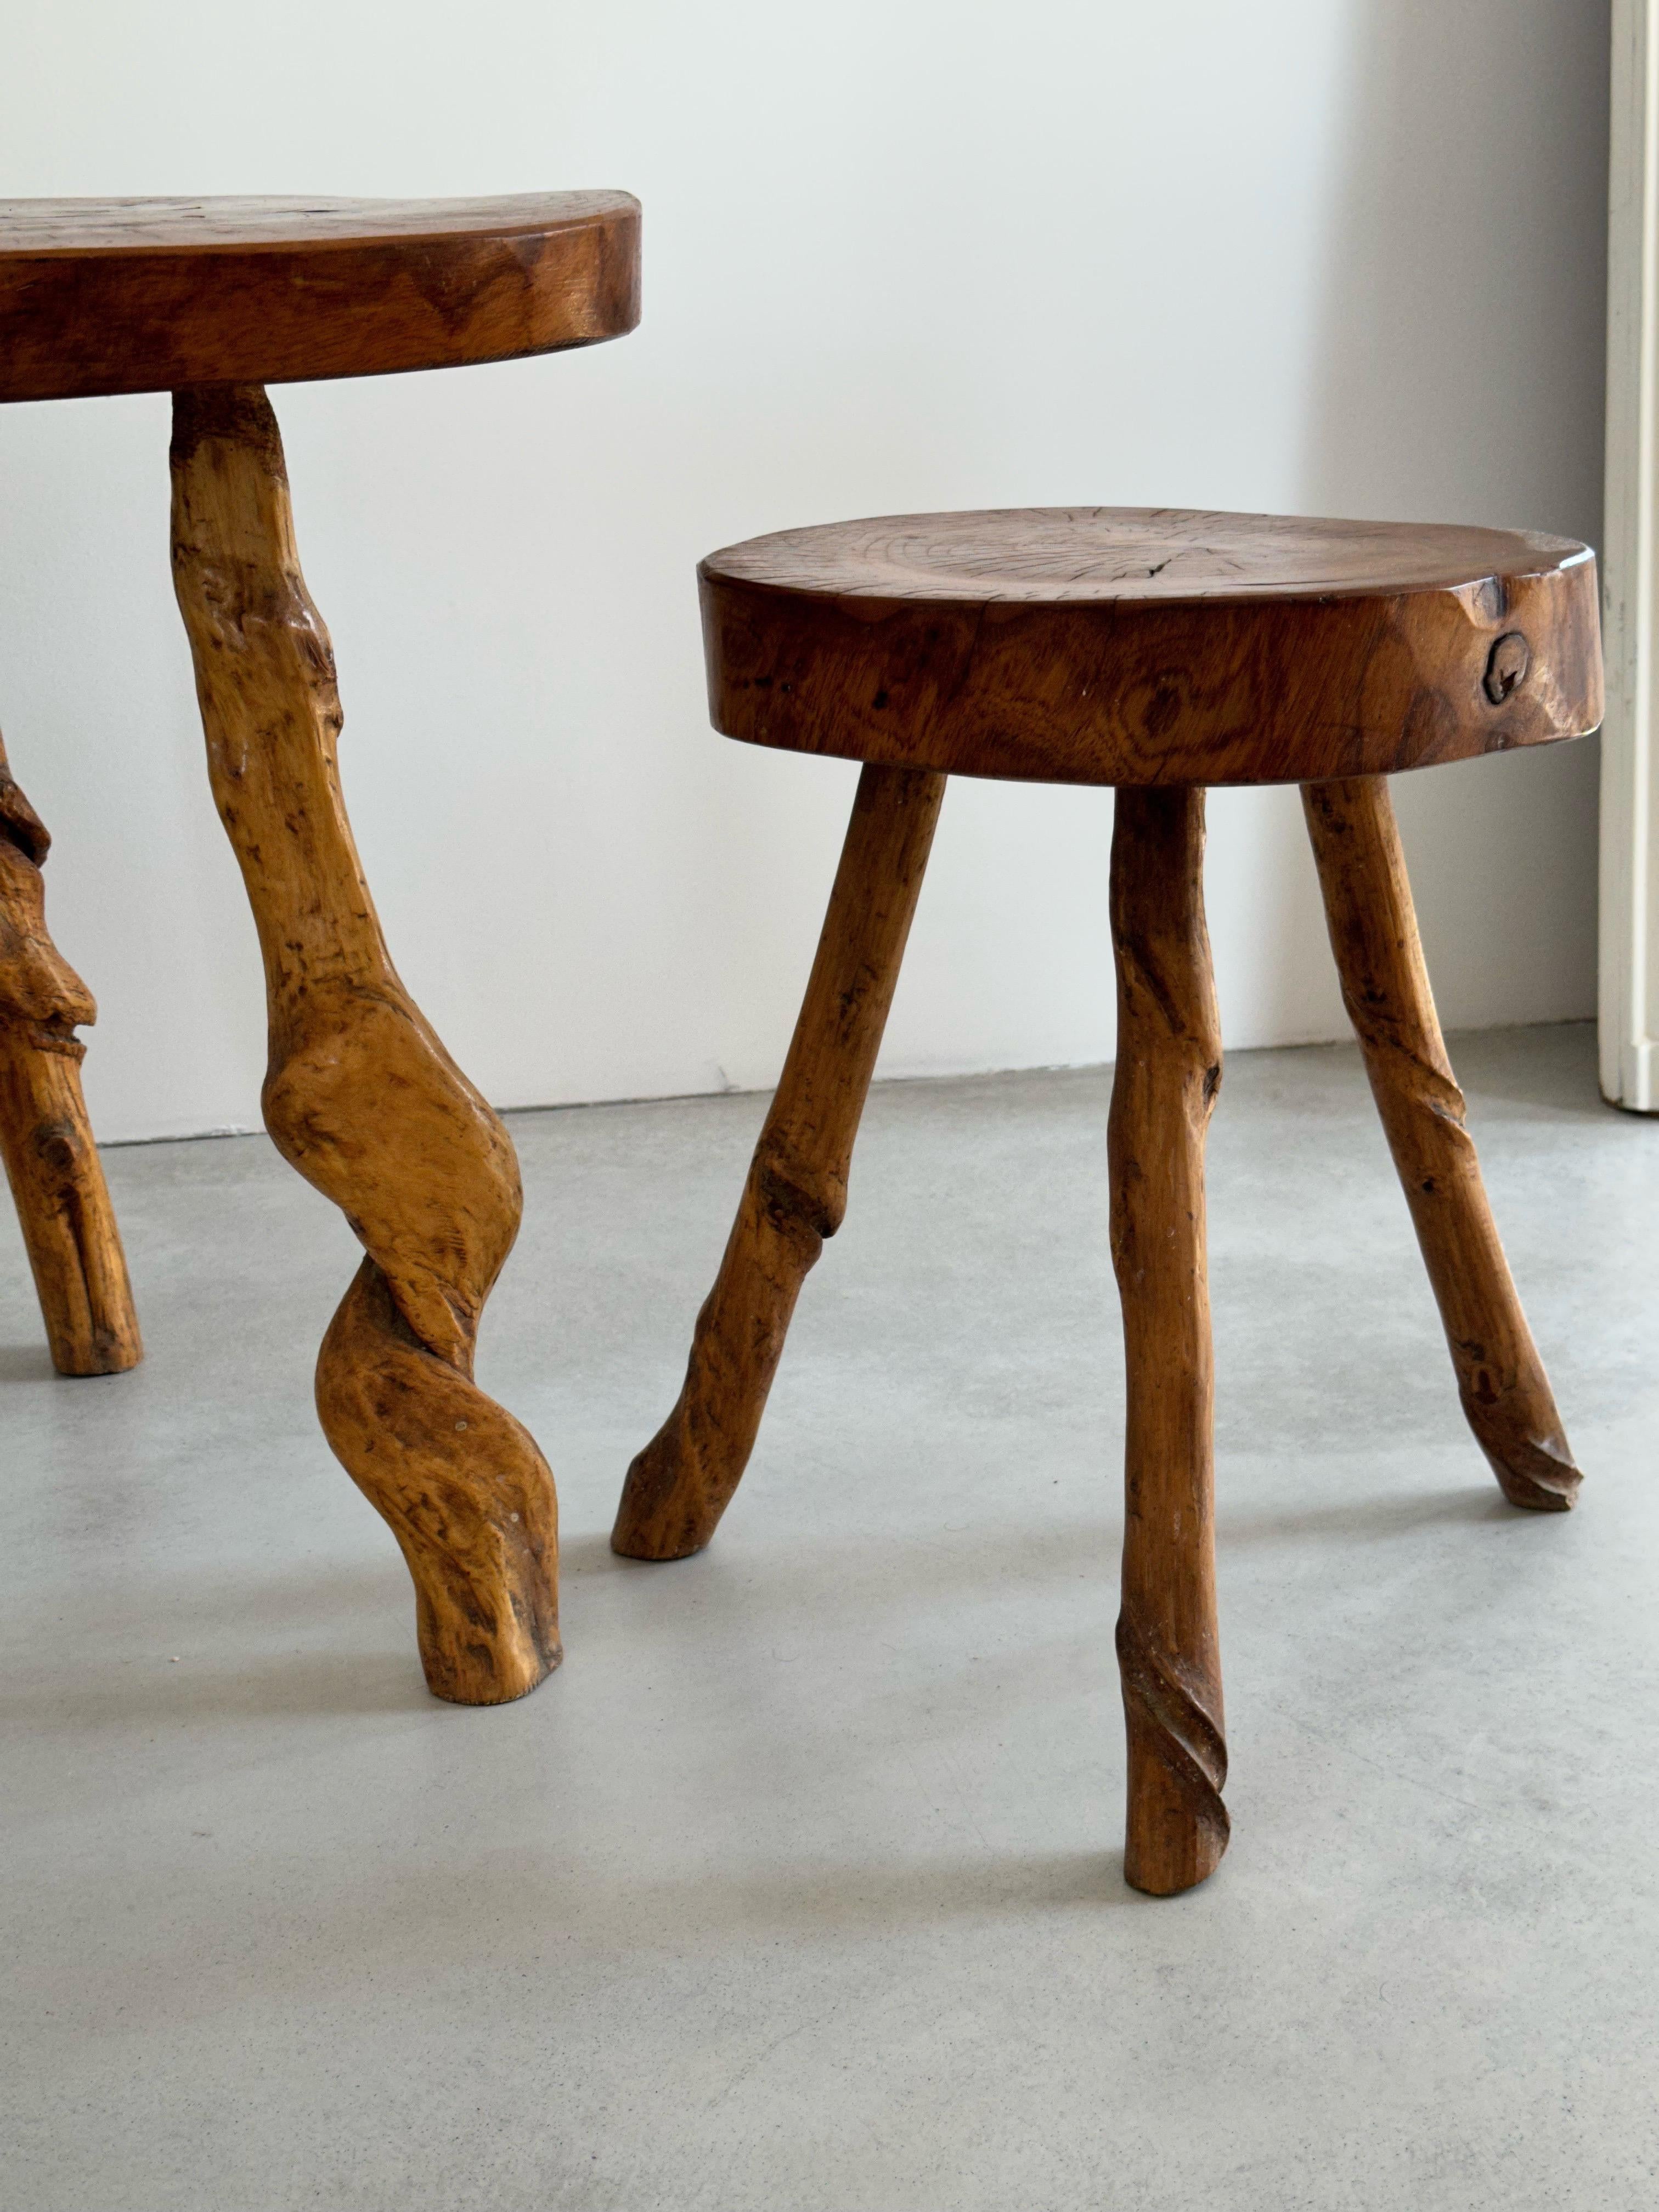 Brutalist Set of 3 Low Stools and 1 Coffee Table, Solid Wood, France, 1960s For Sale 2